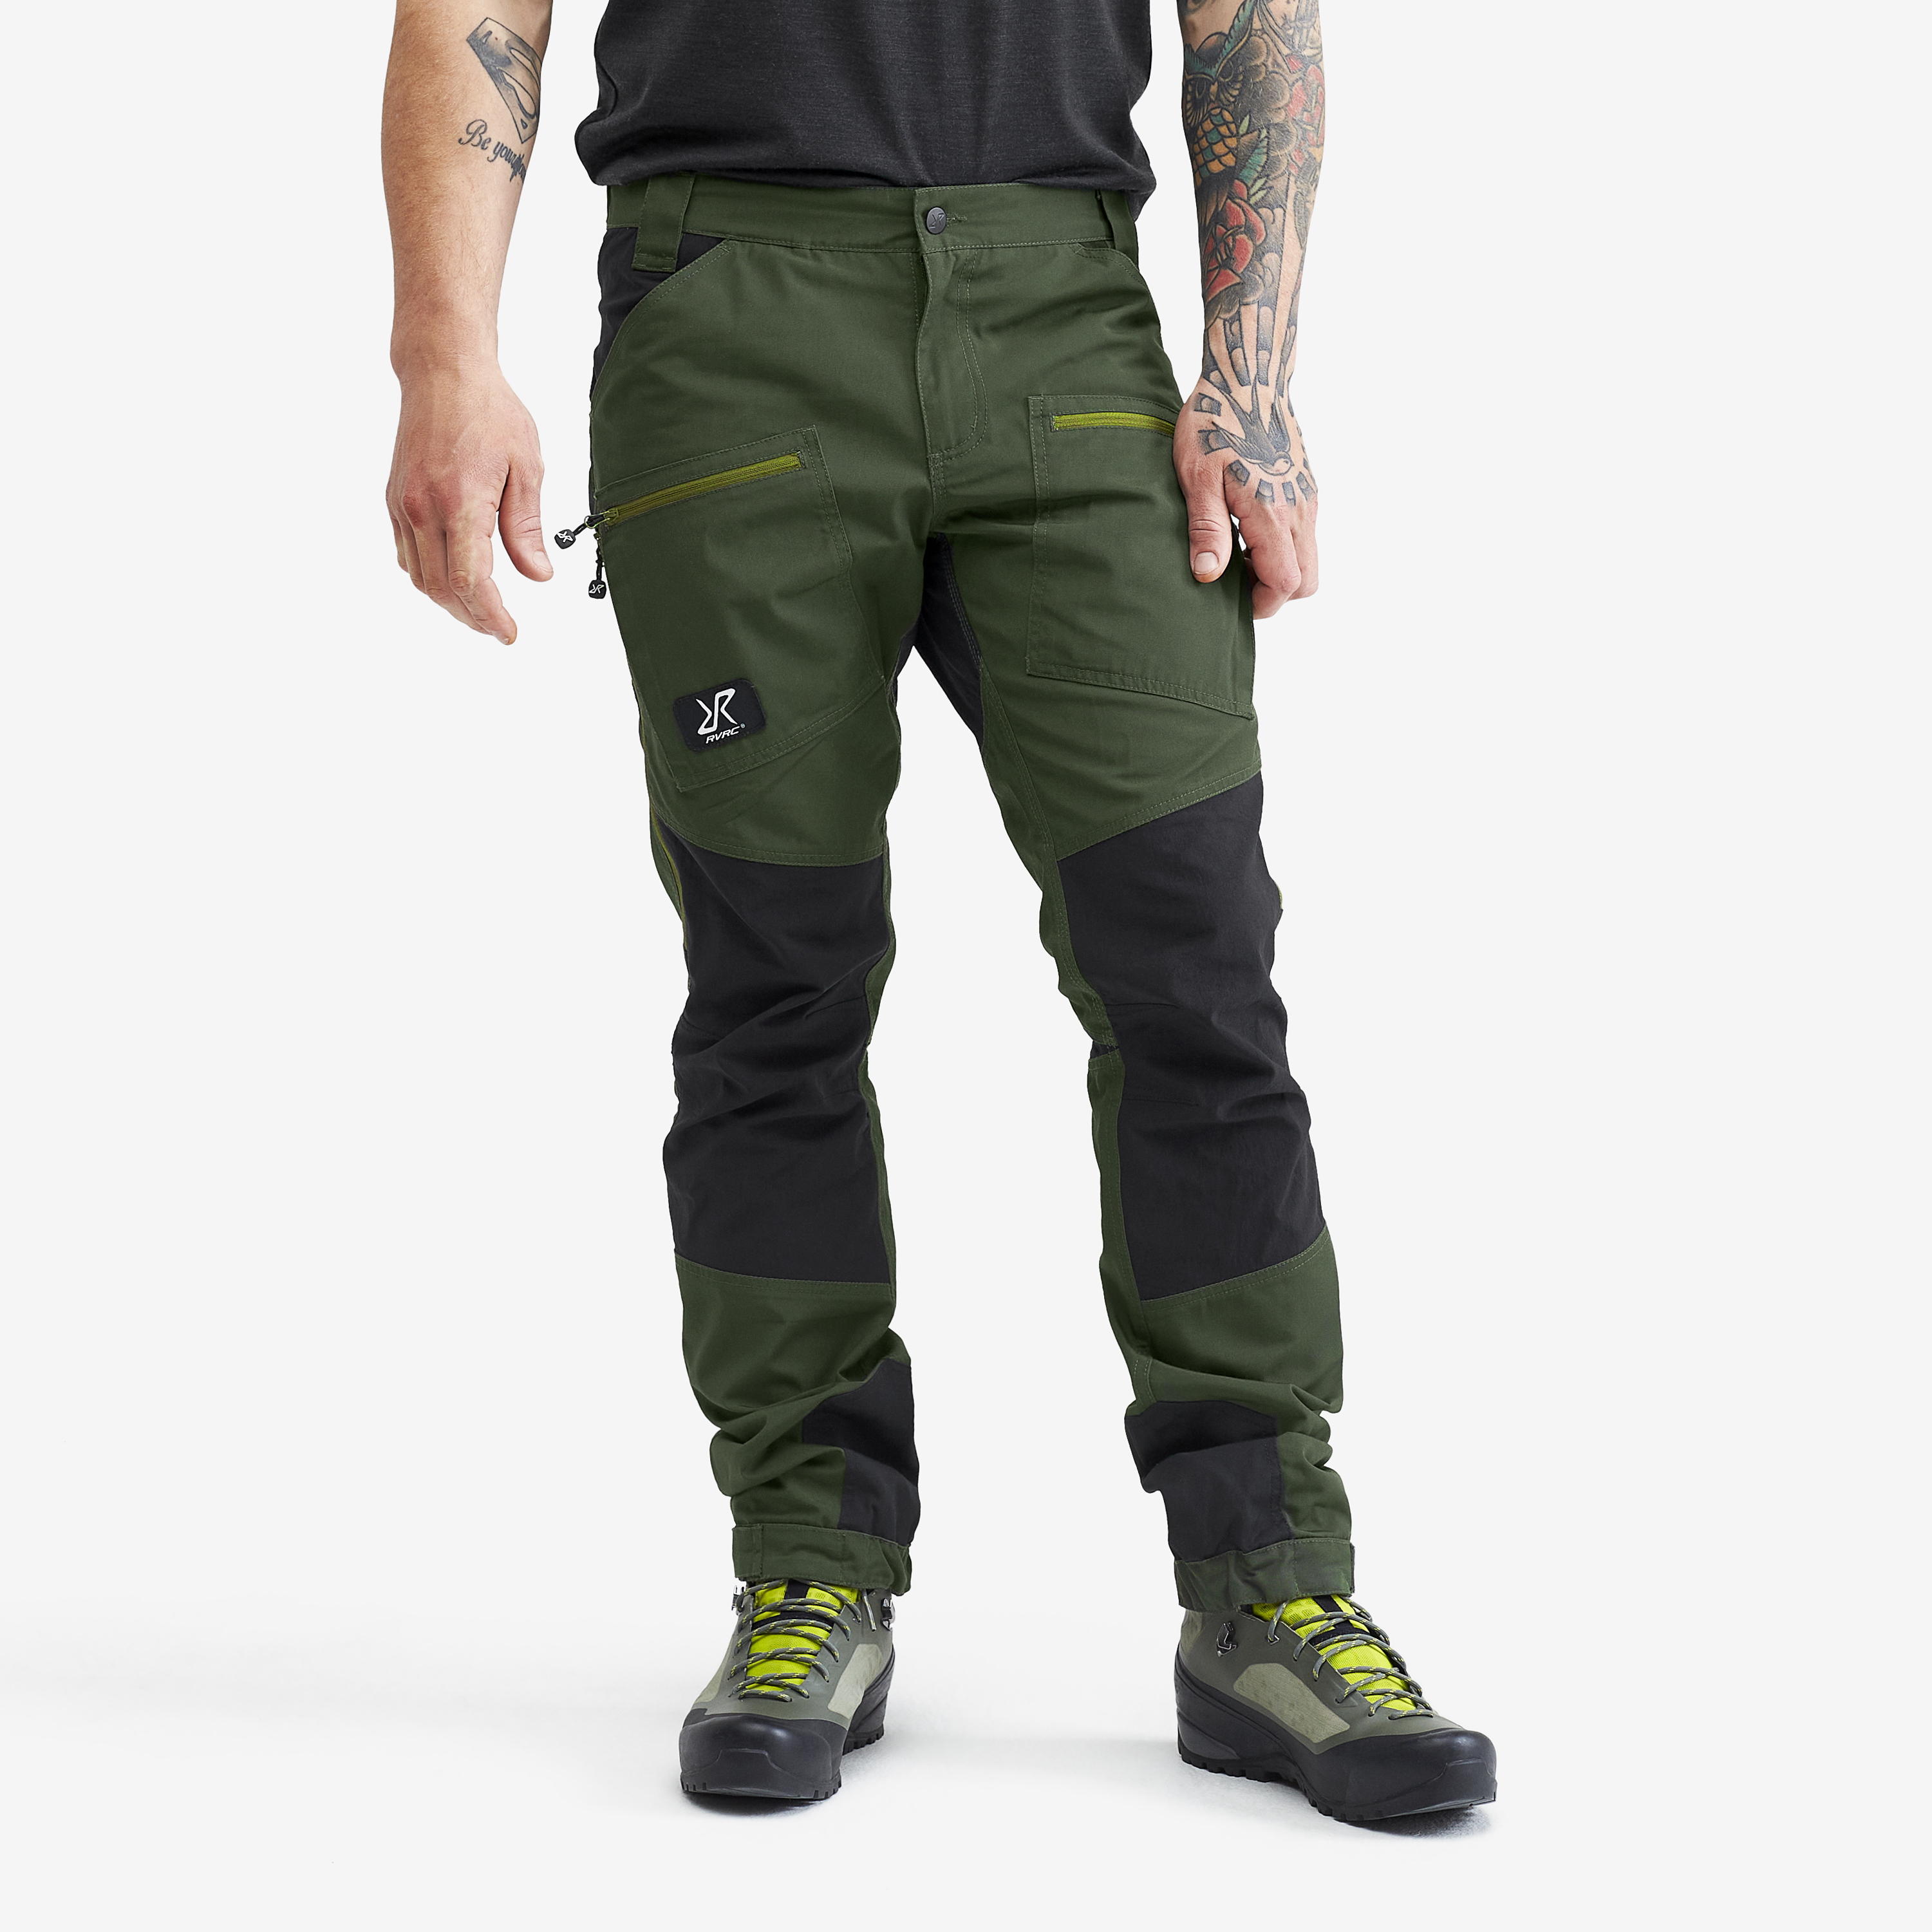 Nordwand Pro Pants Green/Black Homme